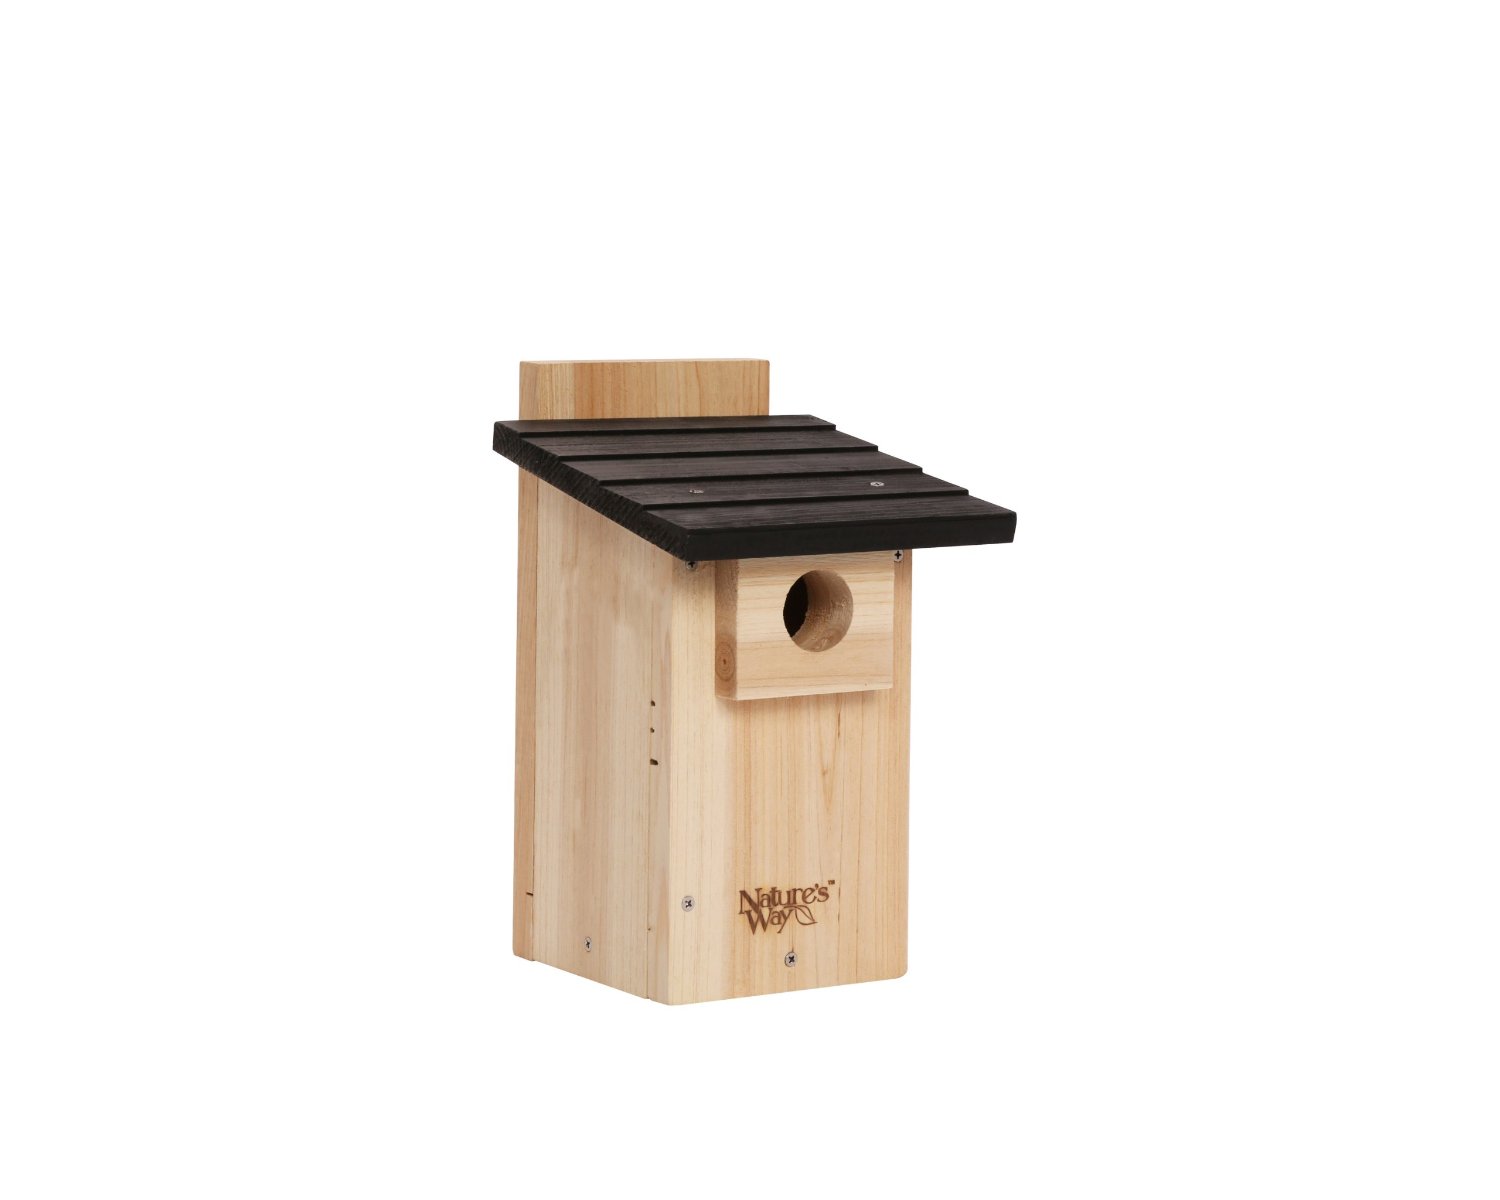 This cedar bluebird viewing house includes a side viewing window to watch